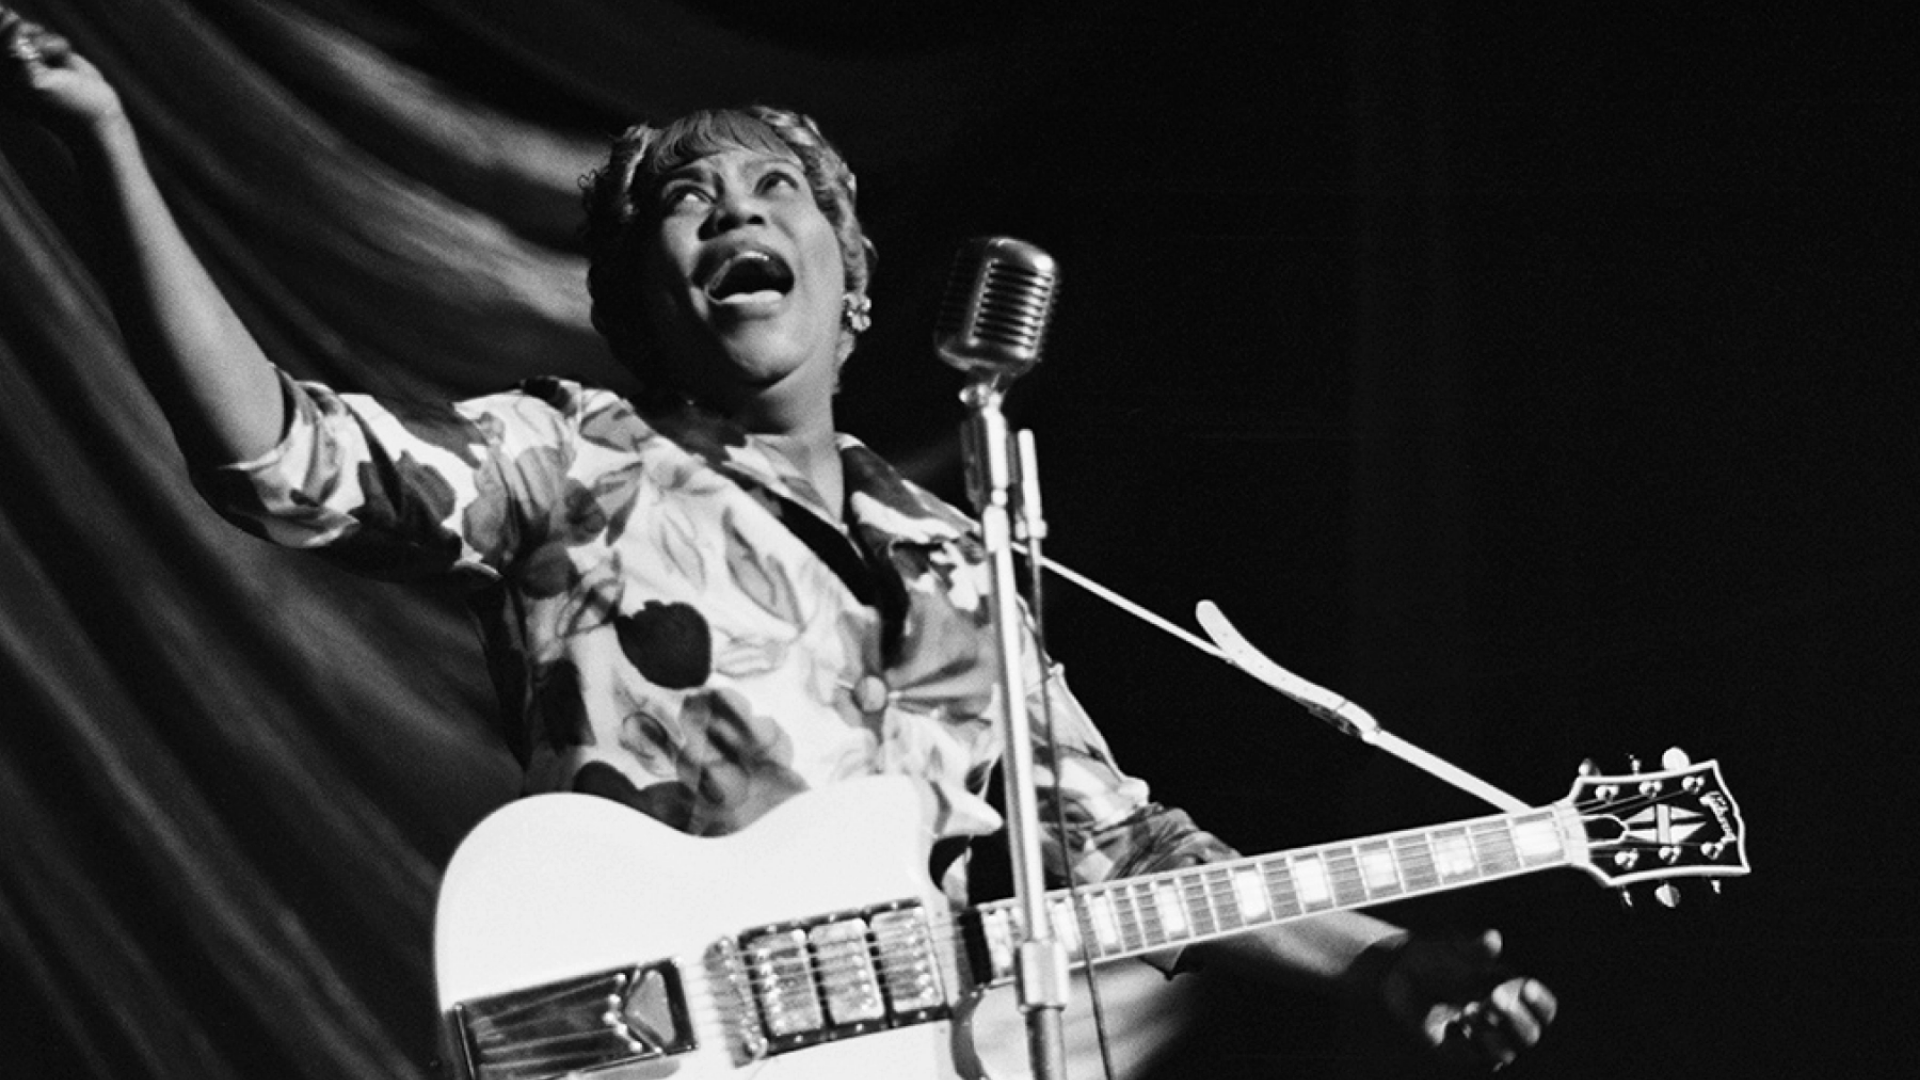 Old black and white photo of Sister Rosetta Tharpe, on stage with a guitar, singing into a microphone.